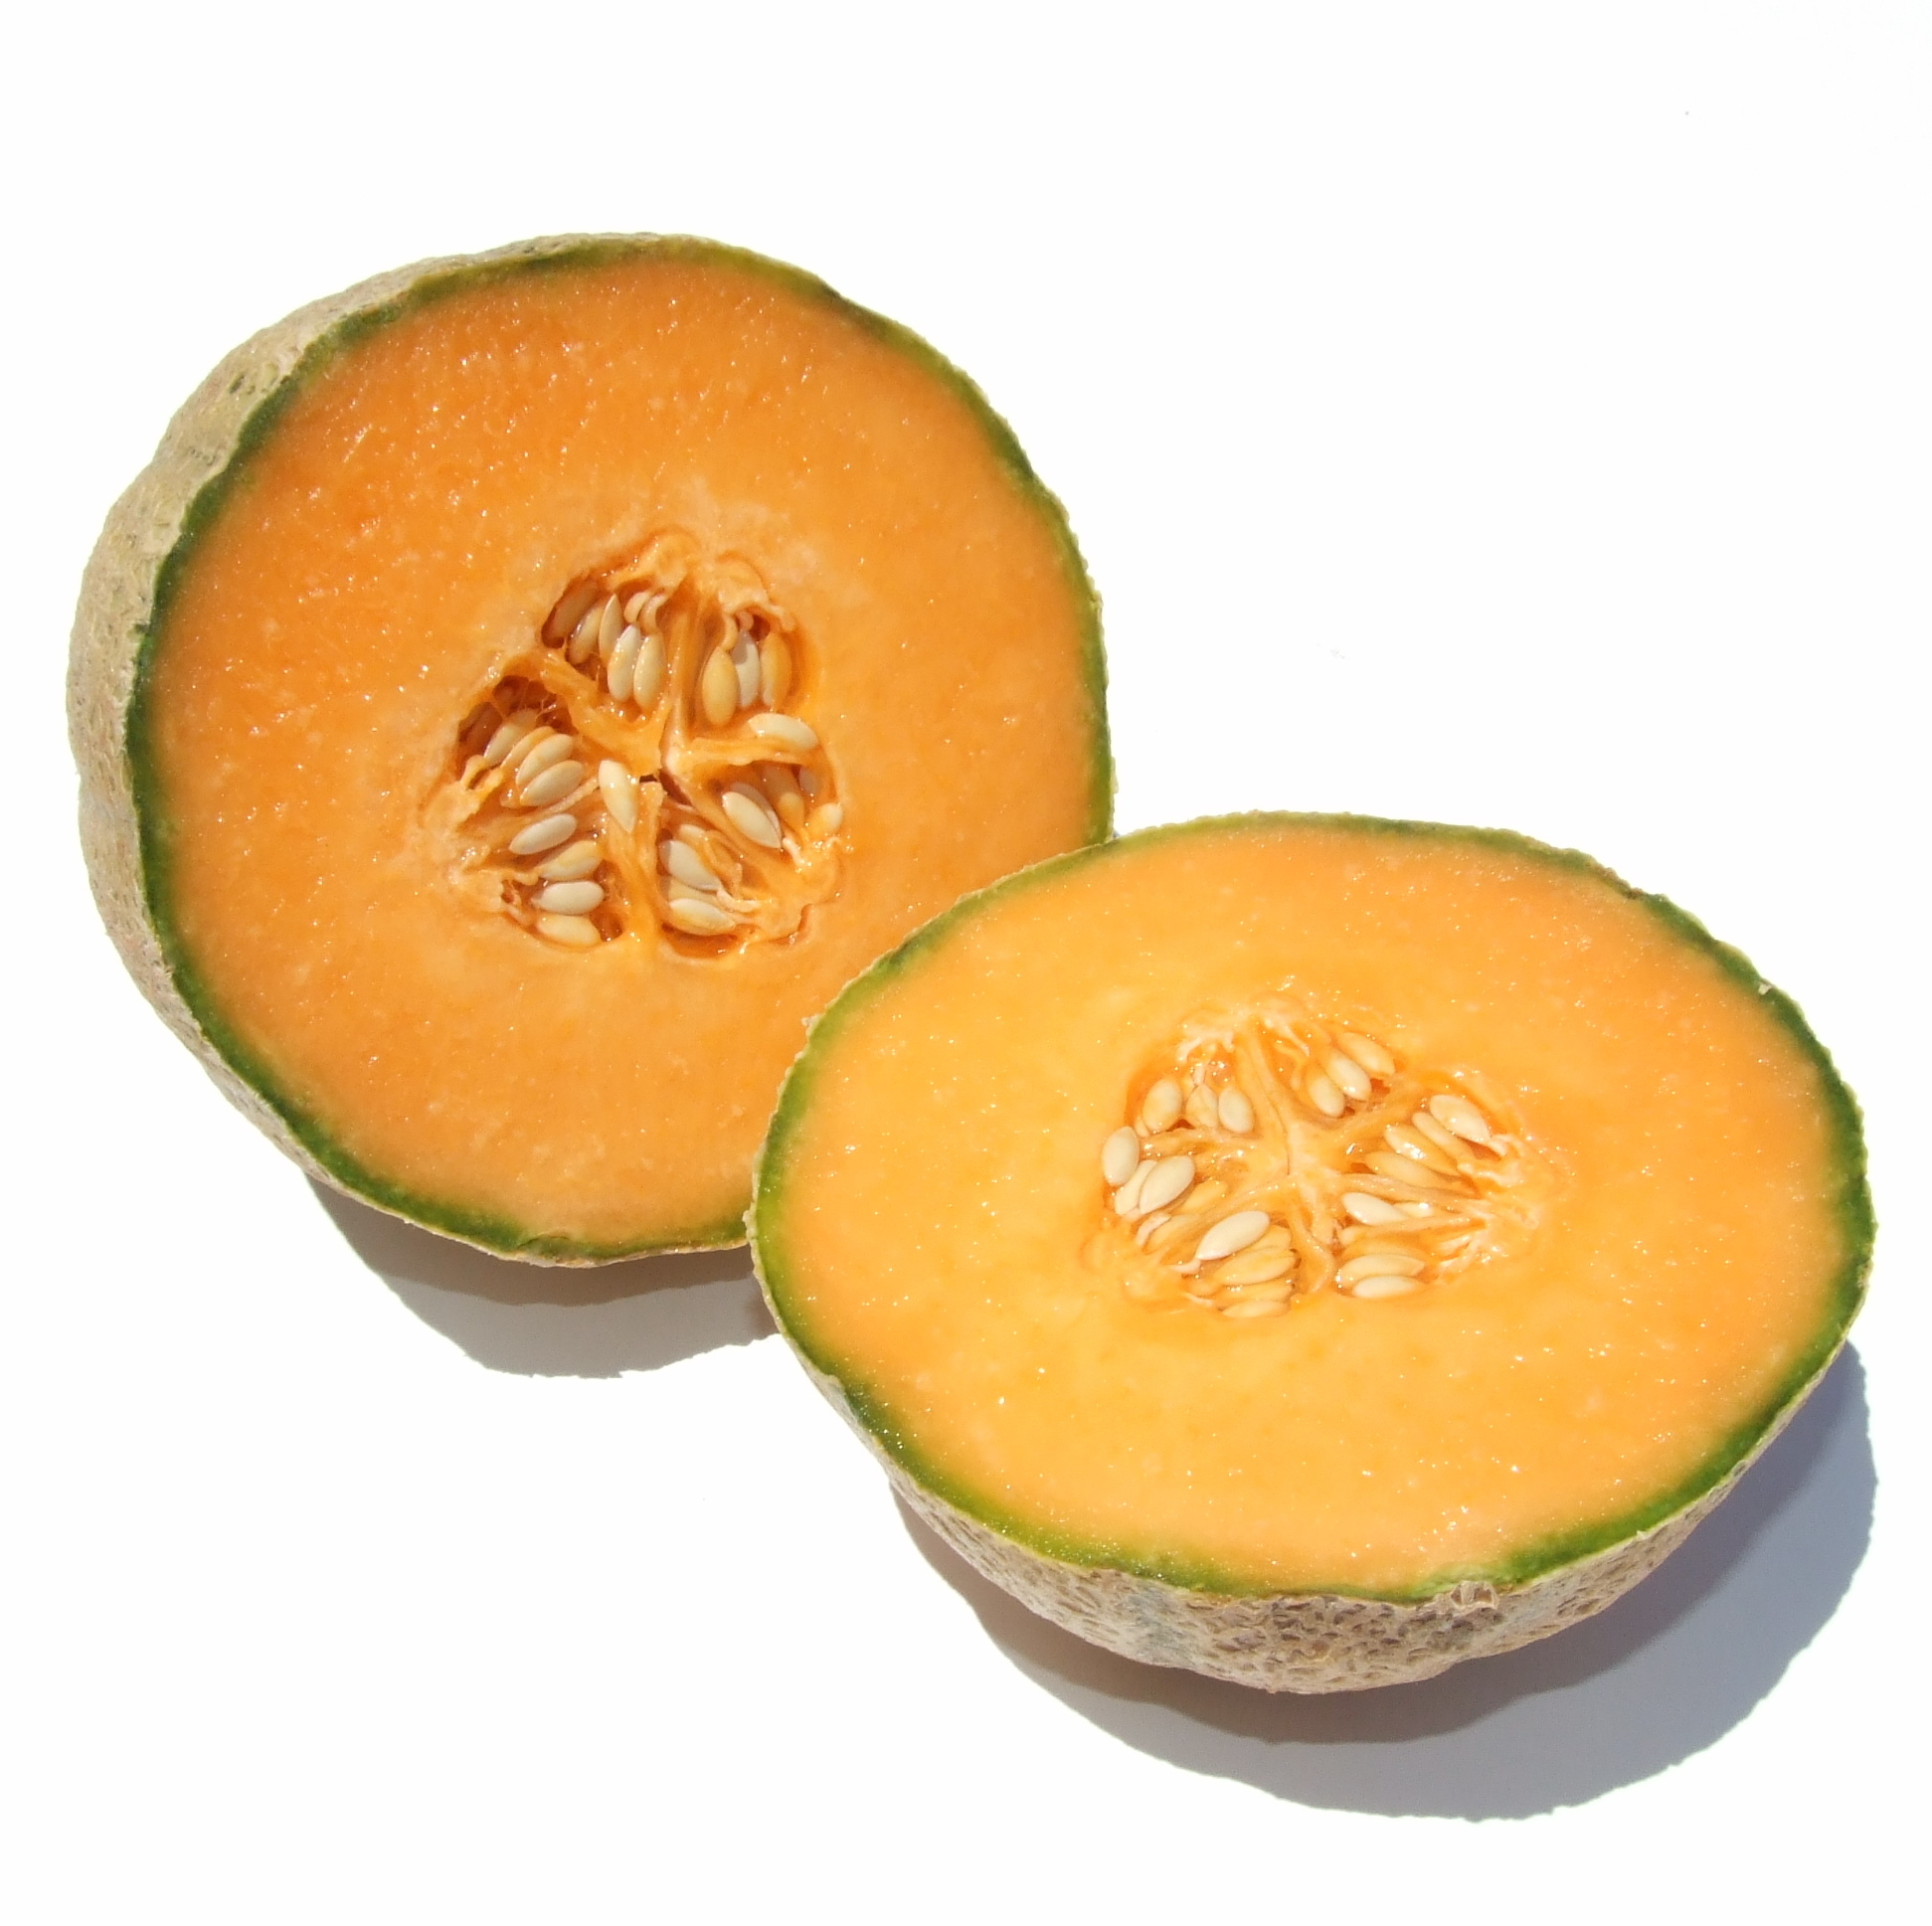 Rock Melon In Malay / ROCK MELON - Mukesh Trading / The flesh surrounds